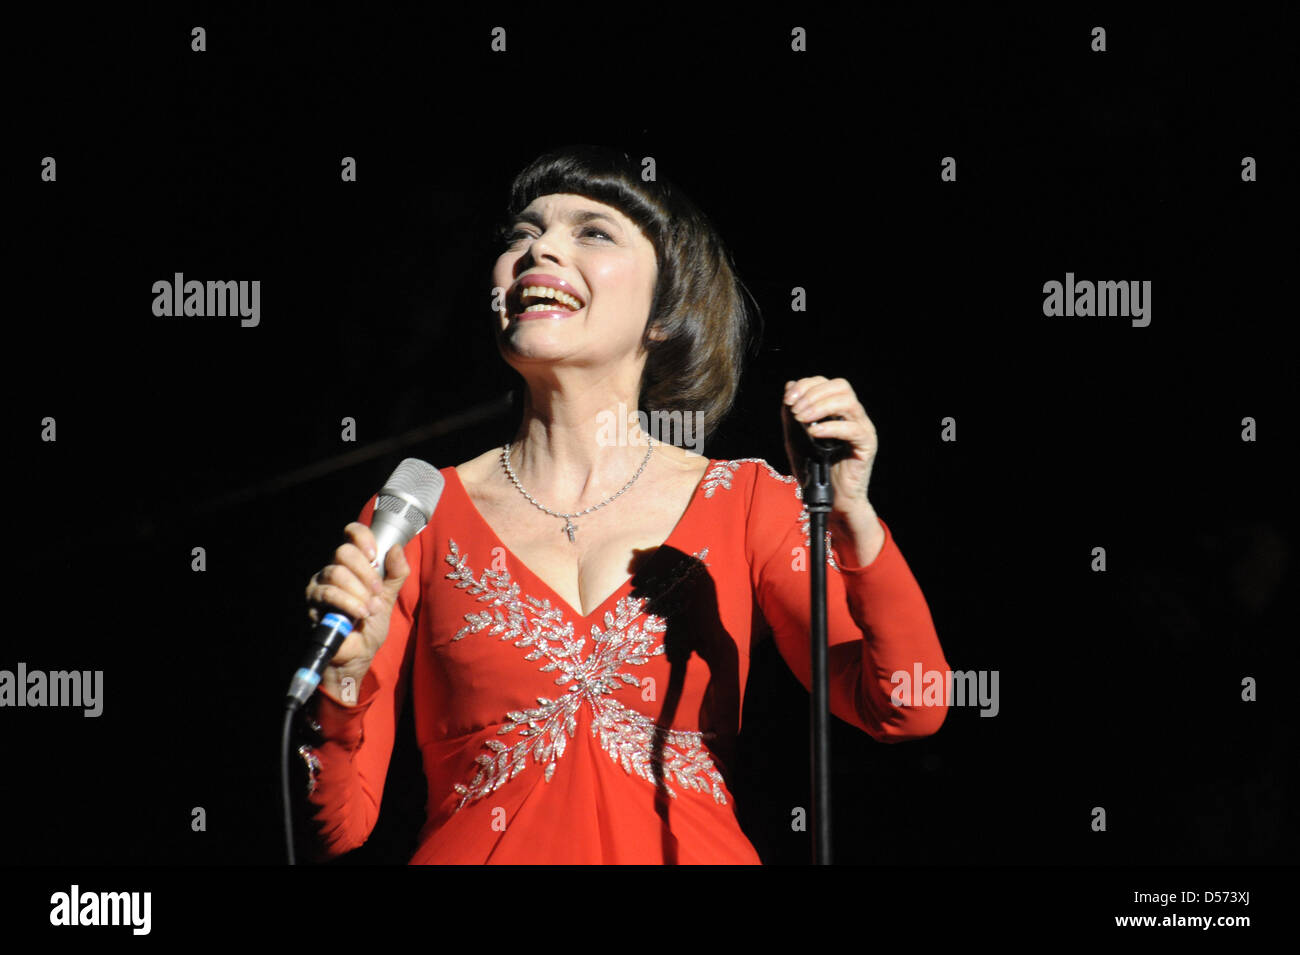 French chansonn singer Mireille Mathieu gives a concert in Halle Saale, Germany, 14 April 2010. Mathieu presents her greatest hits and songs of her German record 'Nah bei Dir' ('Close to you') in 22 concerts in Germany, Denmark and Austria. Photo: Peter Endig Stock Photo